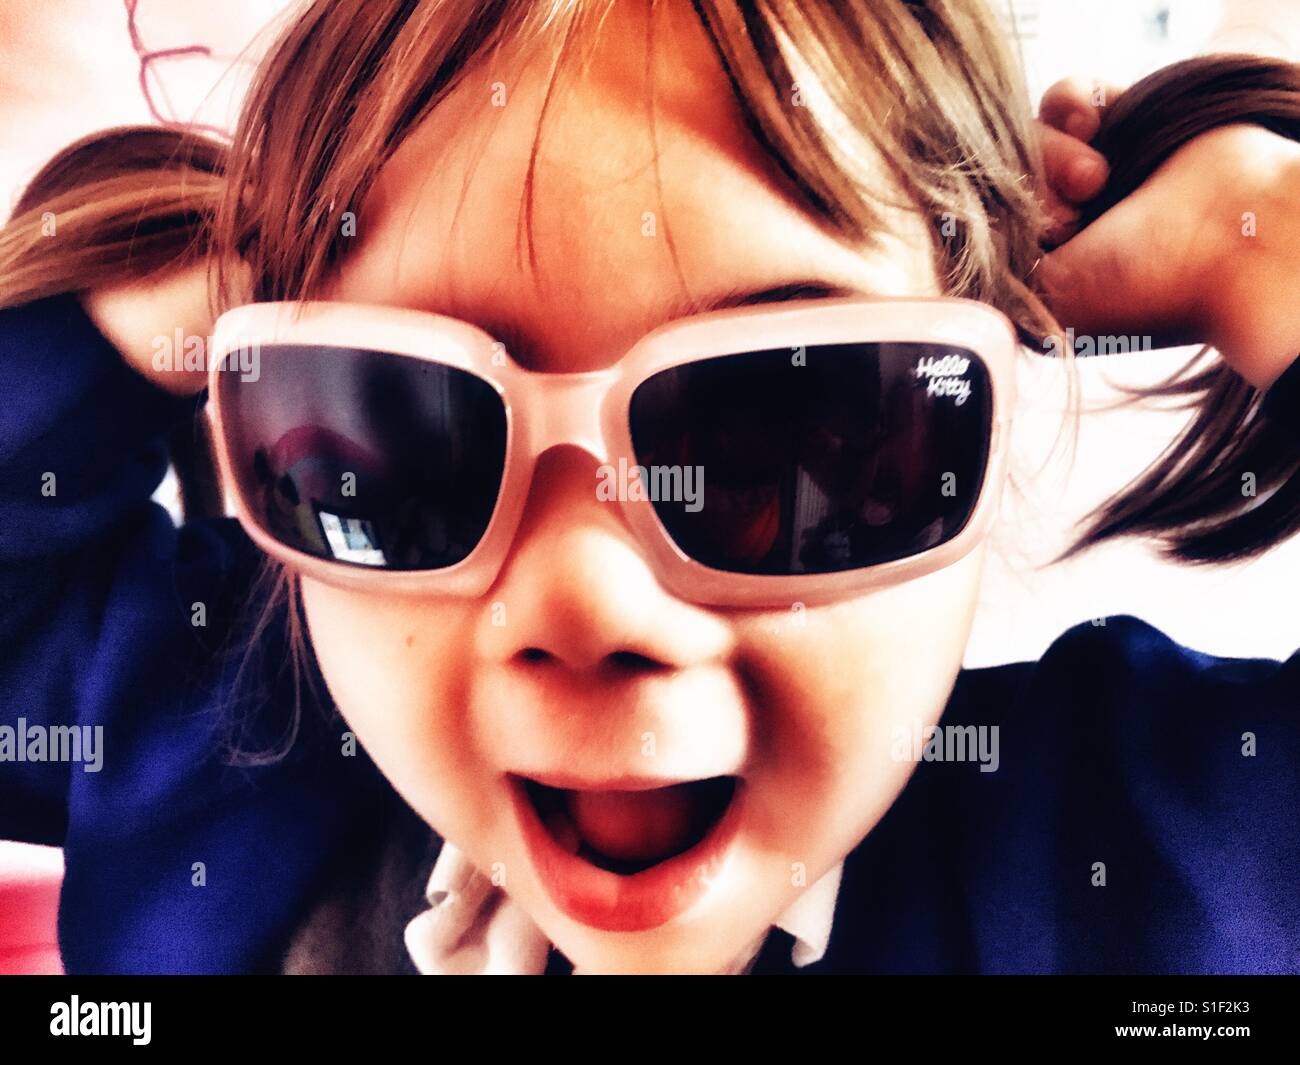 Girl in Sunglasses with pigtails Stock Photo